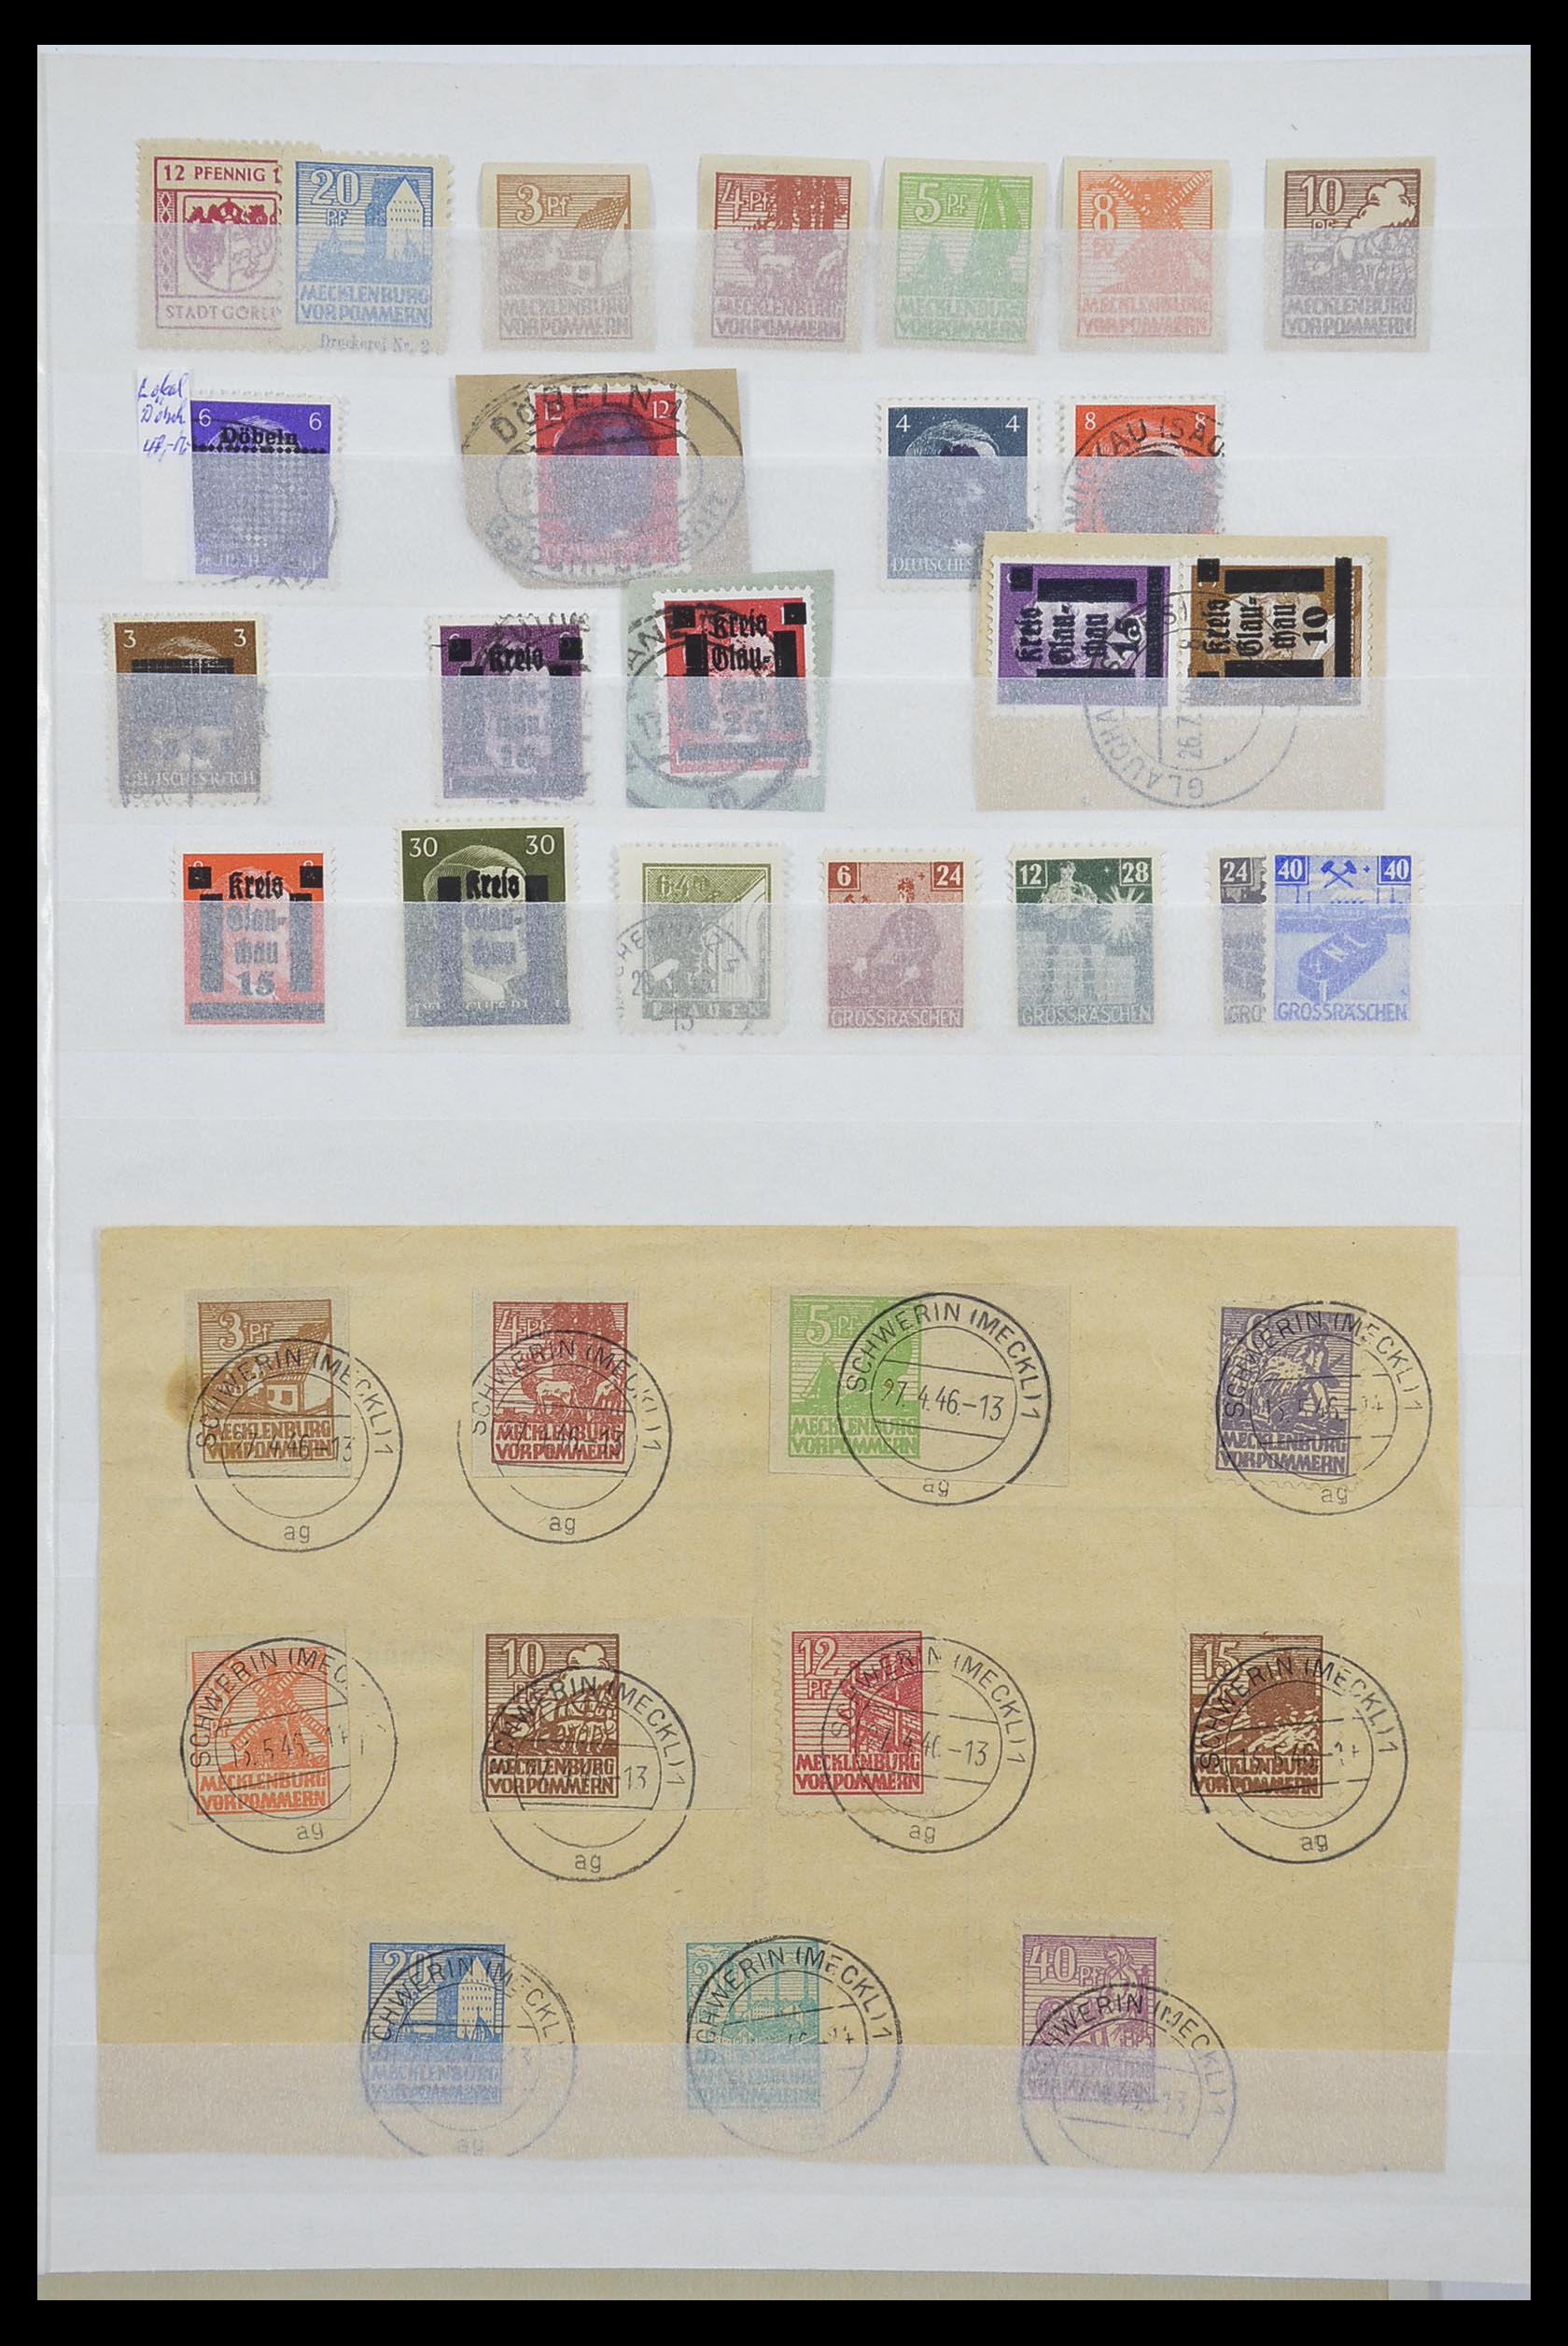 33268 001 - Stamp collection 33268 German local post and Sovjetzone 1945-1949.